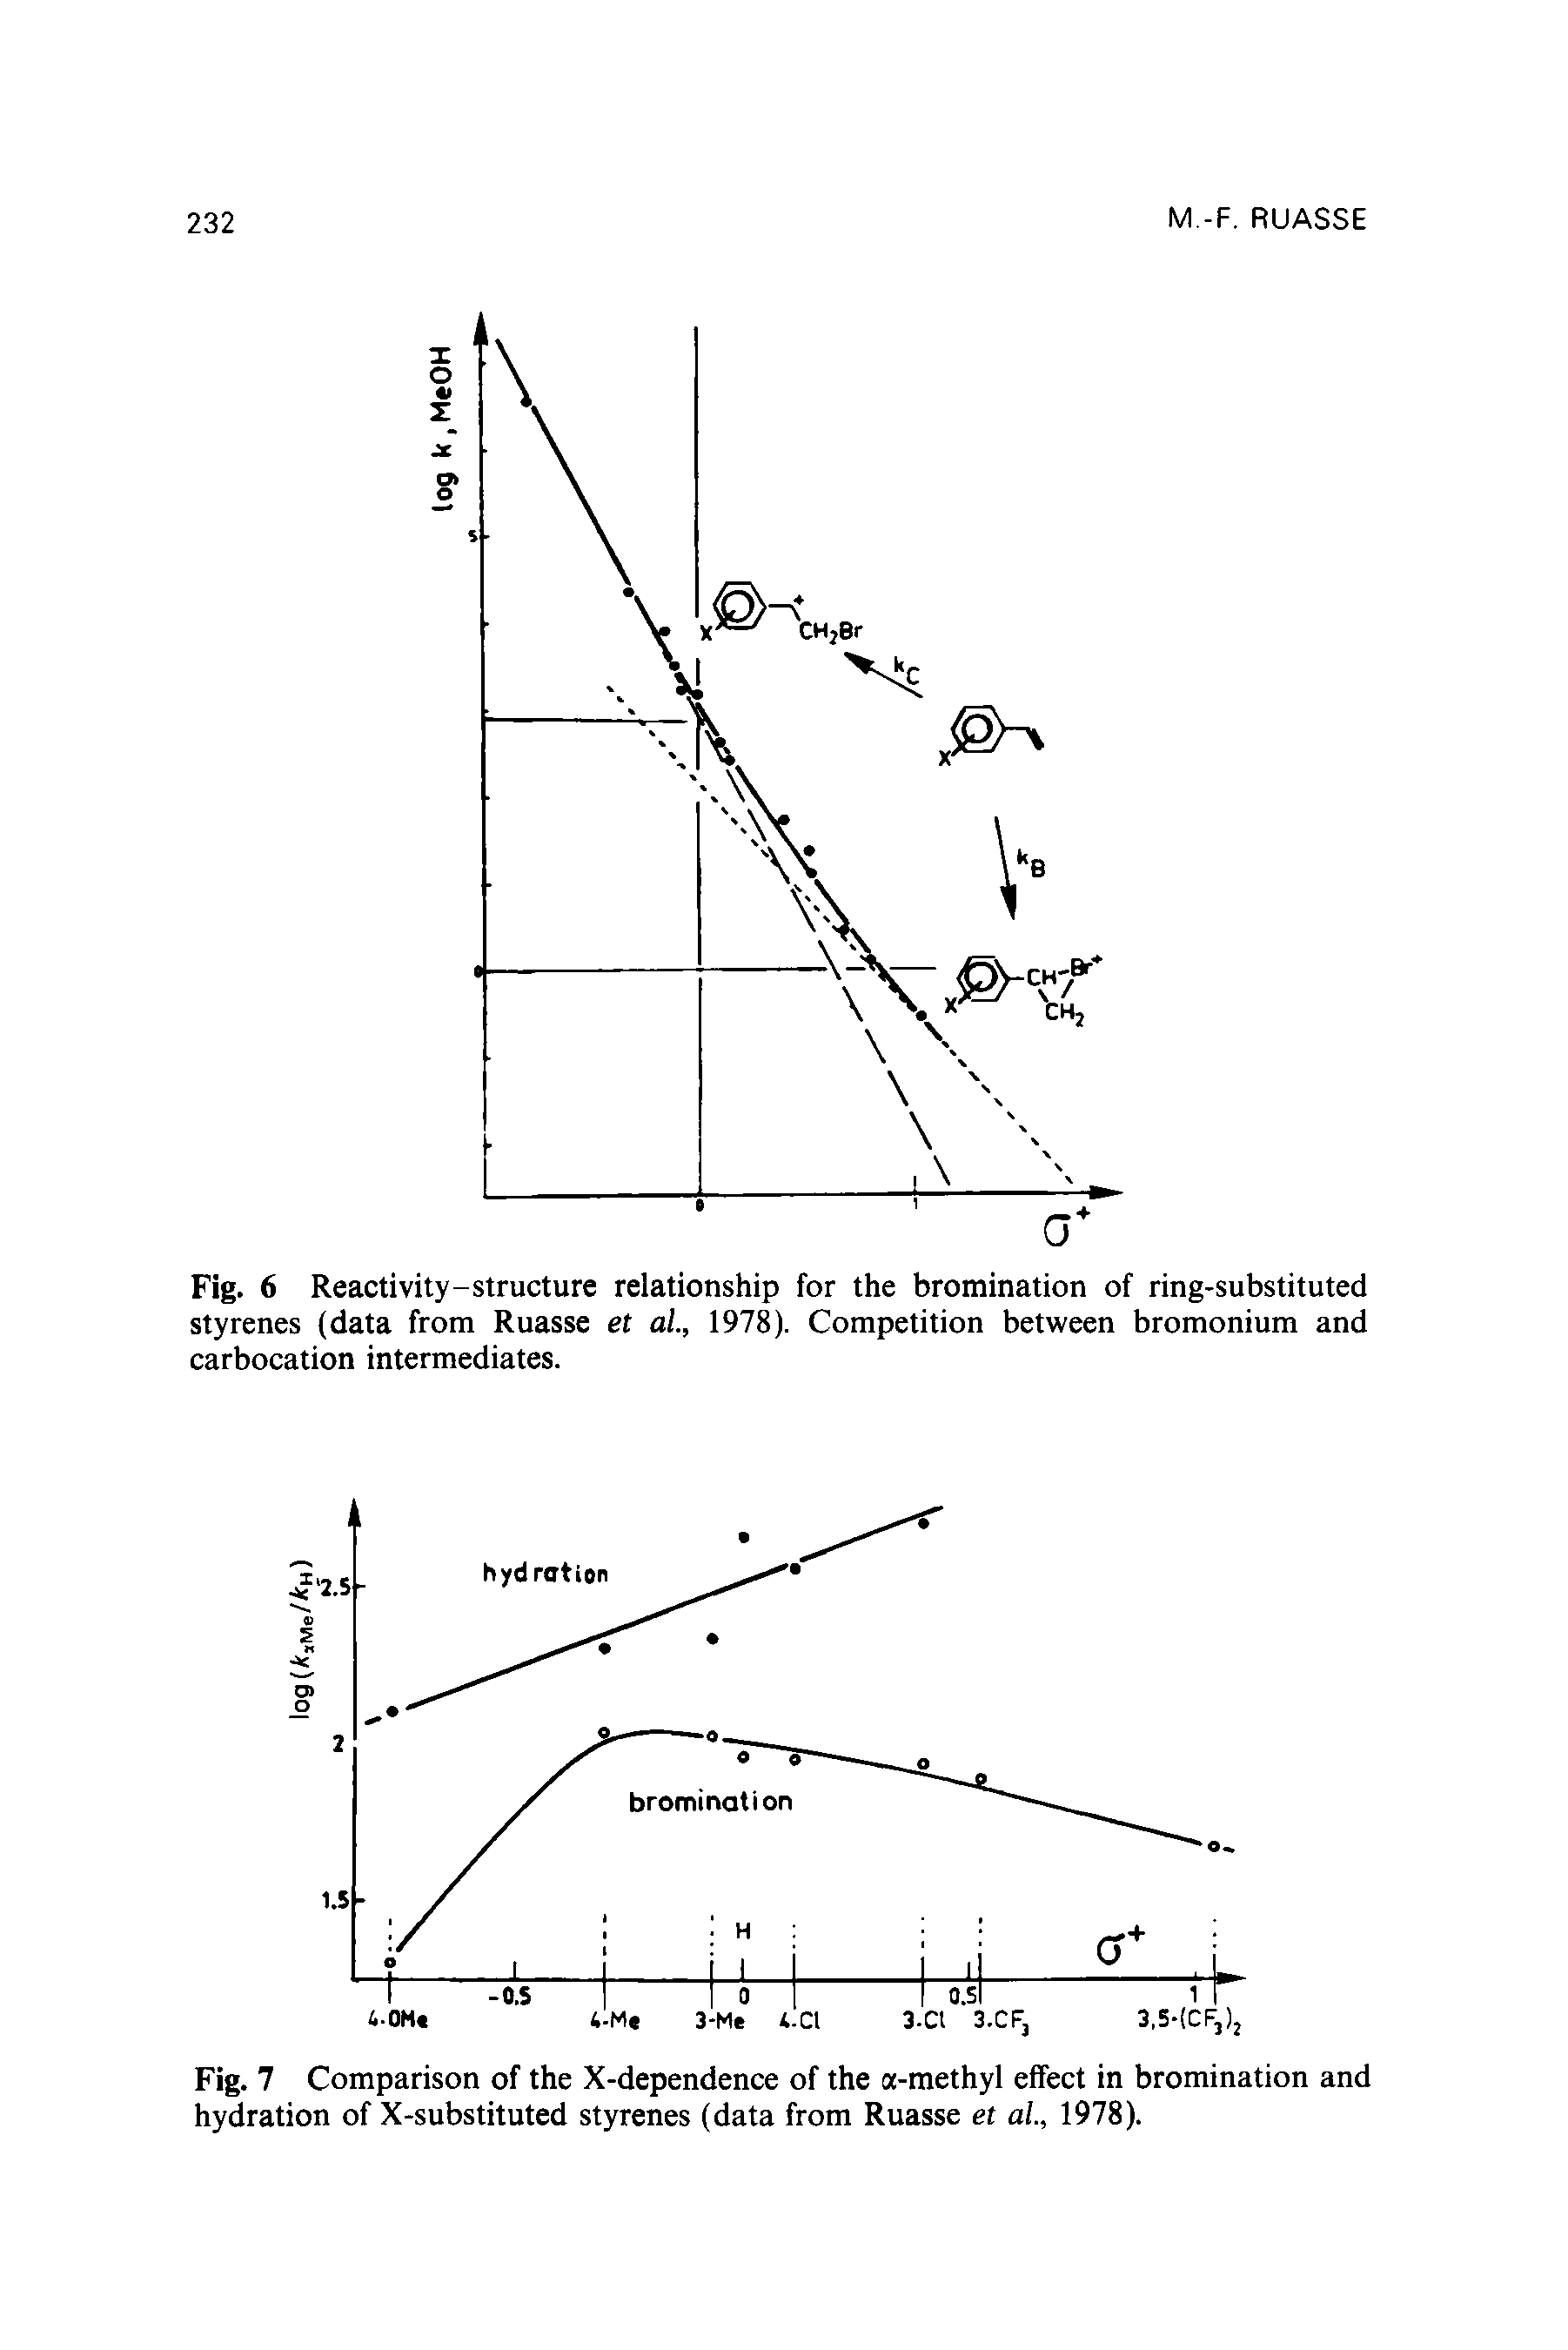 Fig. 6 Reactivity-structure relationship for the bromination of ring-substituted styrenes (data from Ruasse et ai, 1978). Competition between bromonium and carbocation intermediates.